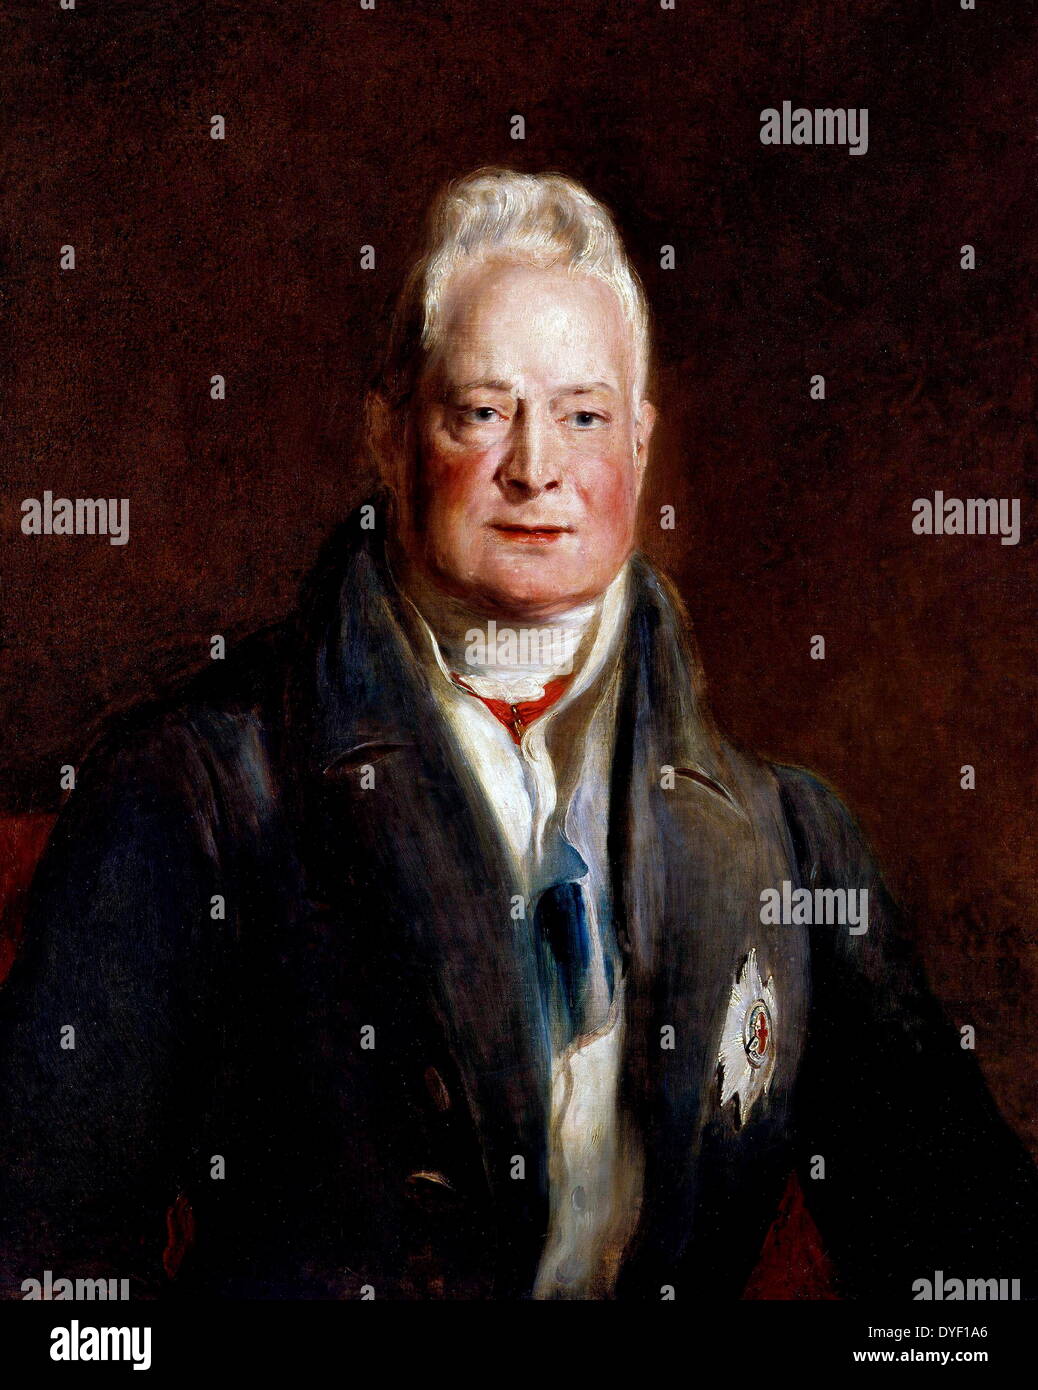 Portrait of William IV, King of the United Kingdom of Great Britain and Ireland, as well as Hanover from 26 June 1830 until his death. Lived from 21st August 1765 – 20 June 1837. The third son of George III and younger brother and successor to George IV. Stock Photo